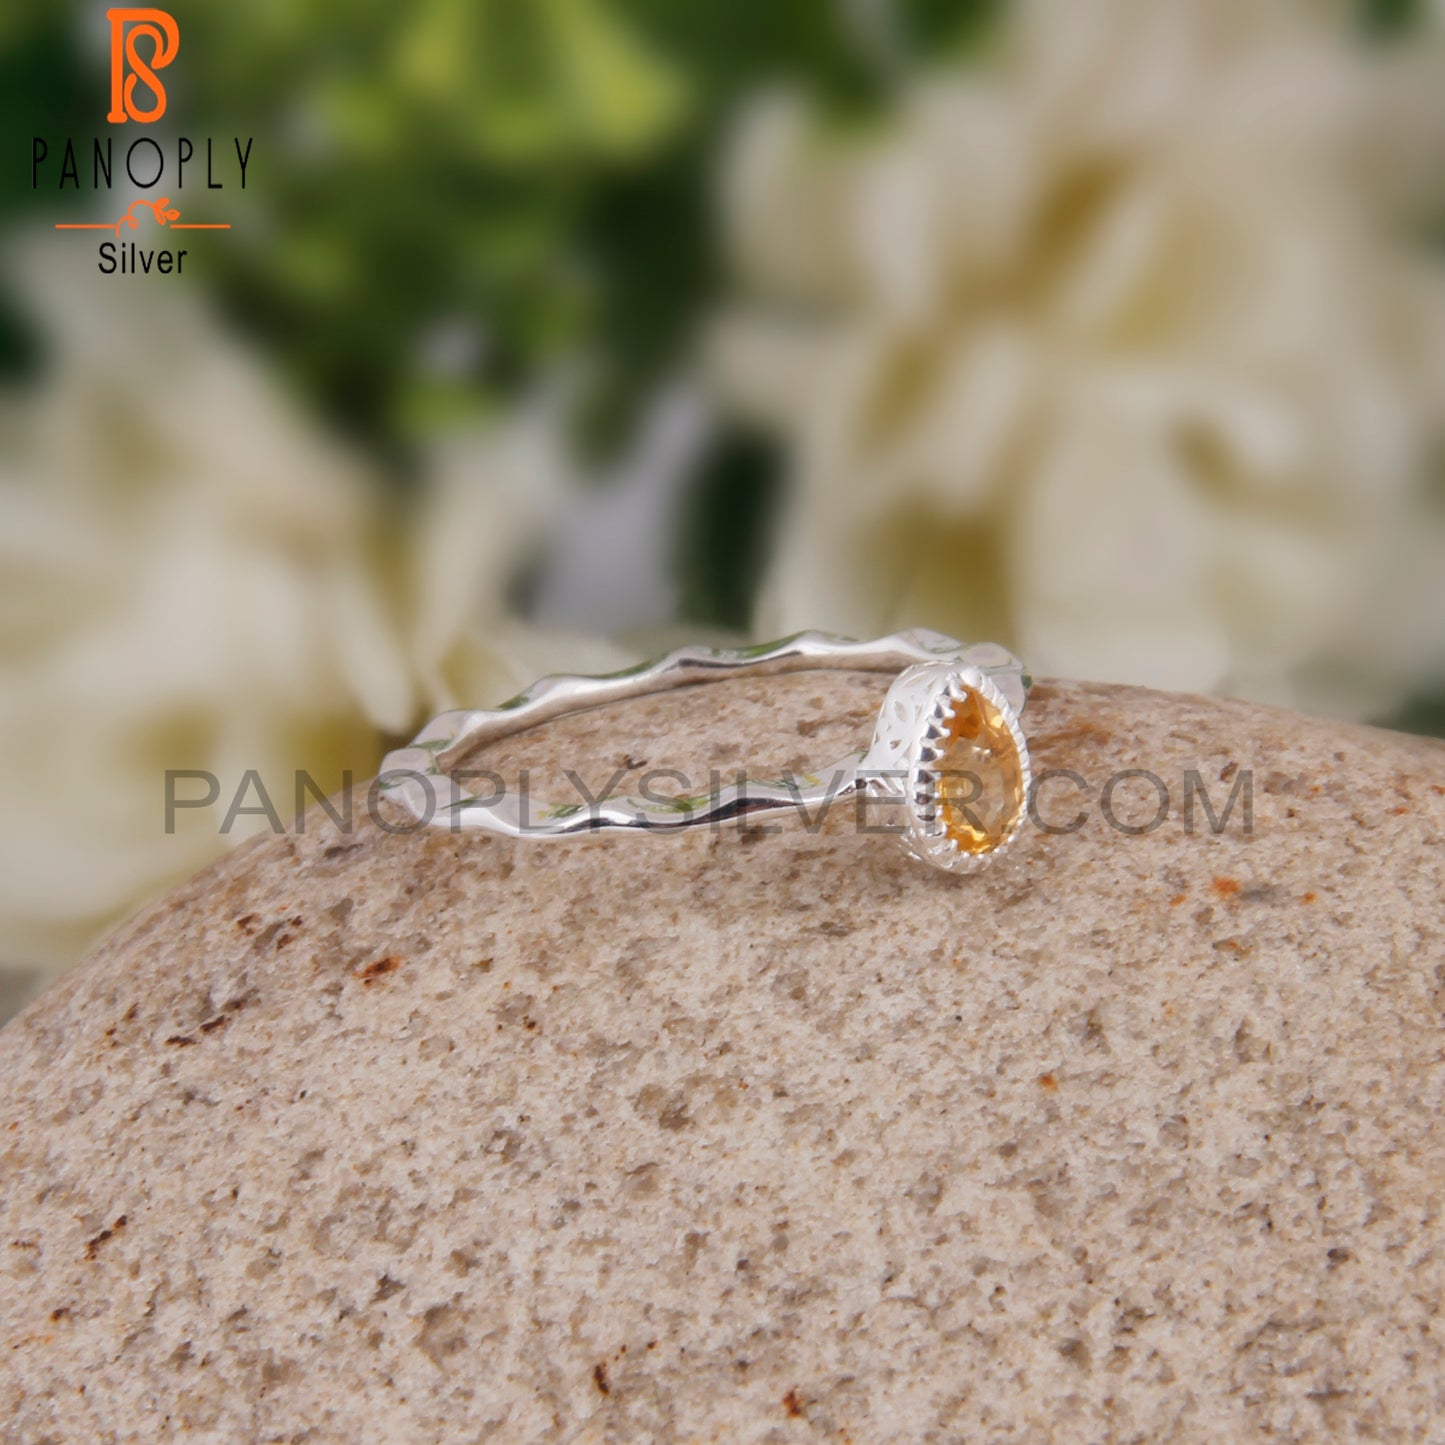 Citrine Pear Shape Daily Wear 925 Sterling Silver Ring